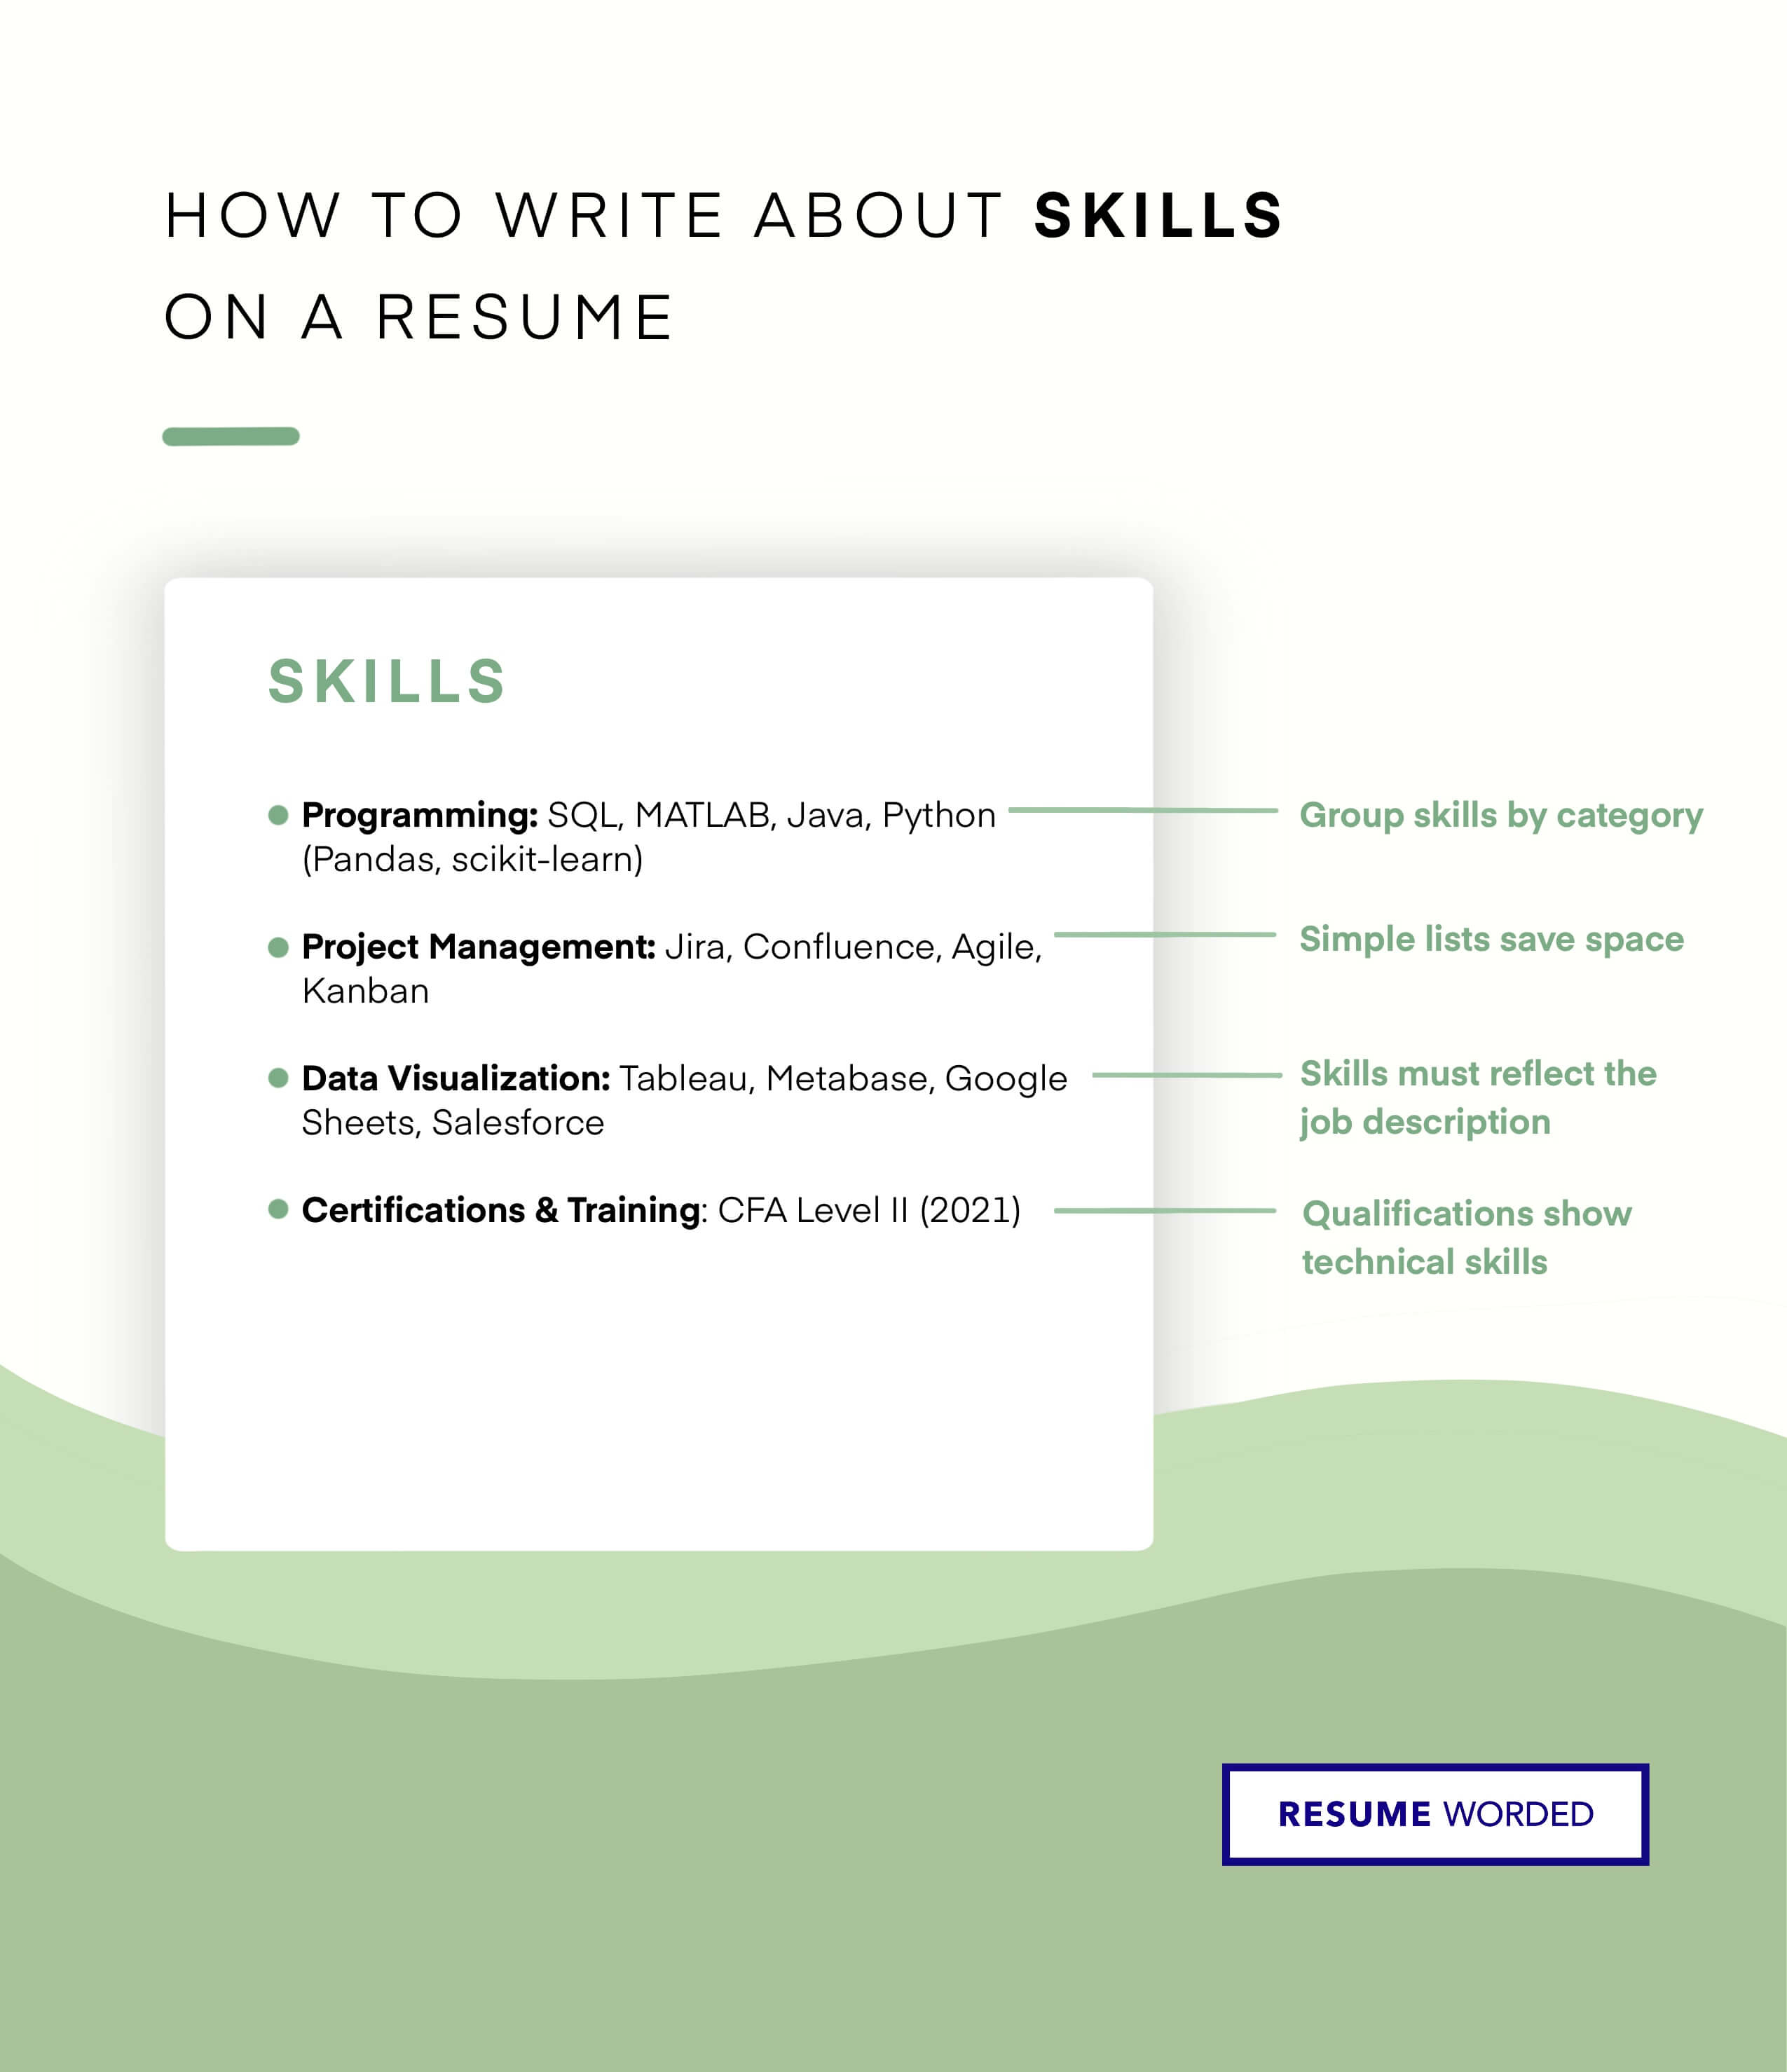 Effective use of skills section to describe marketing skills - Marketing Manager Resume